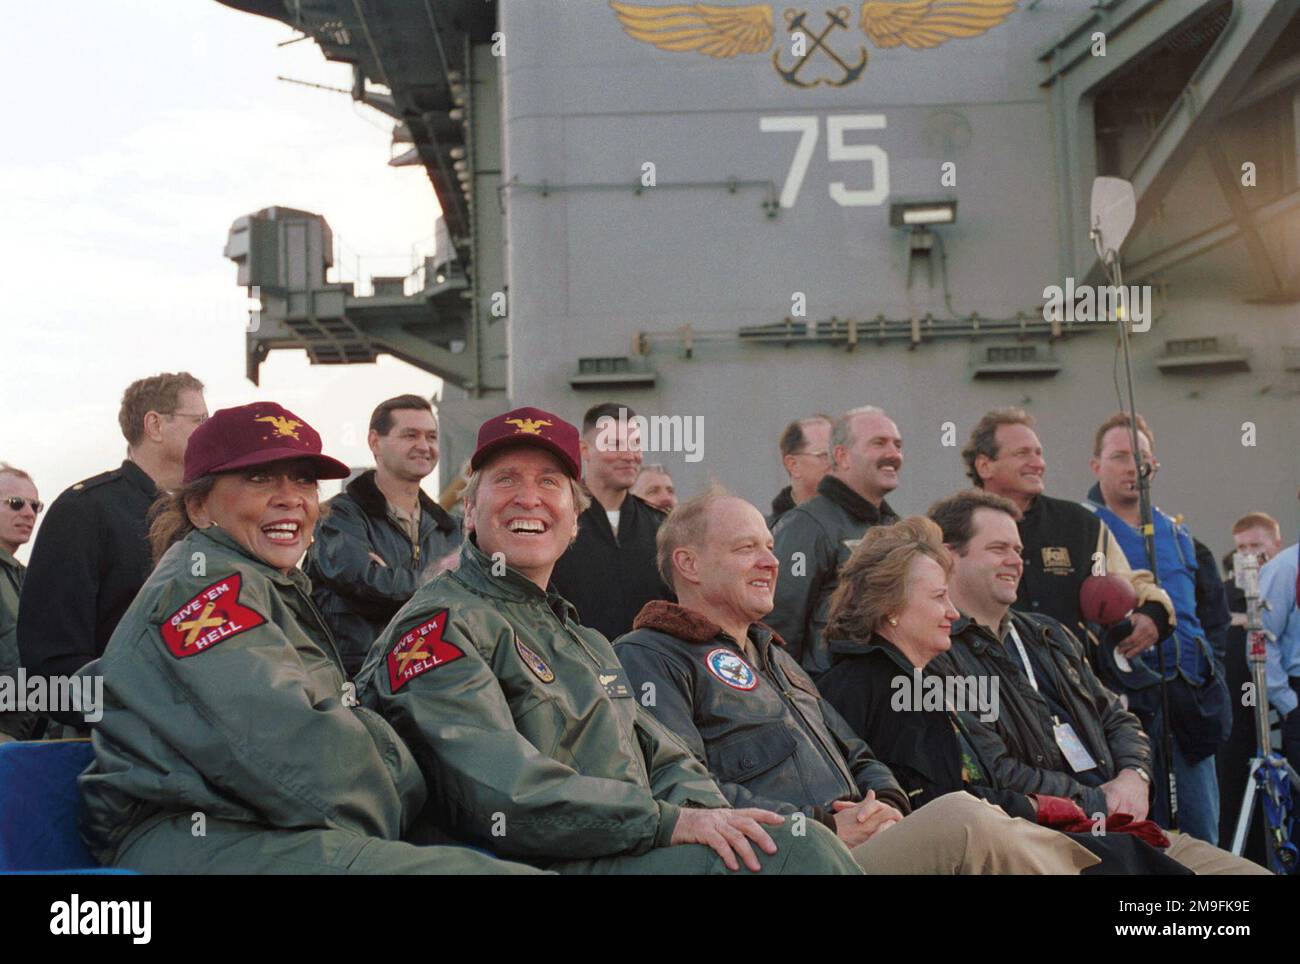 001216-N-0963E-202Secretary of Defense William S. Cohen and his wife Janet join the Sailors and Marines stationed on board the USS Harry S. Truman (CVN 75). The Secretary and his wife attended the taping of the FOX NFL Sports Pre-Game Show aired on the FOX Network. TRUMAN is on a scheduled six-month deployment to the Mediterranean Sea and Arabian Gulf. Base: Uss Harry S. Truman (CVN 75) Country: Atlantic Ocean (AOC) Stock Photo